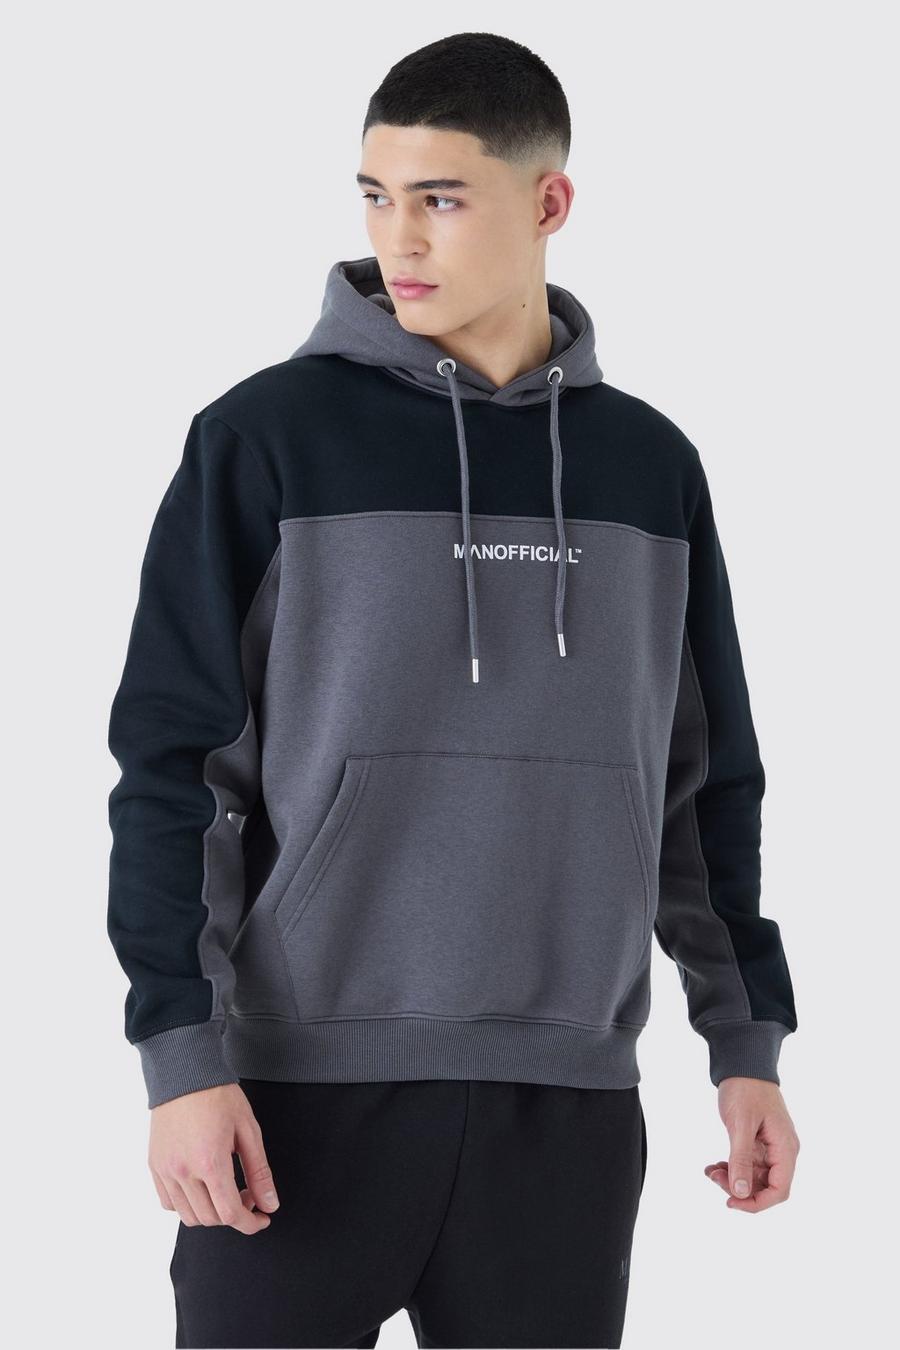 Charcoal grey Man Official Tape Back Colour Block Hoodie